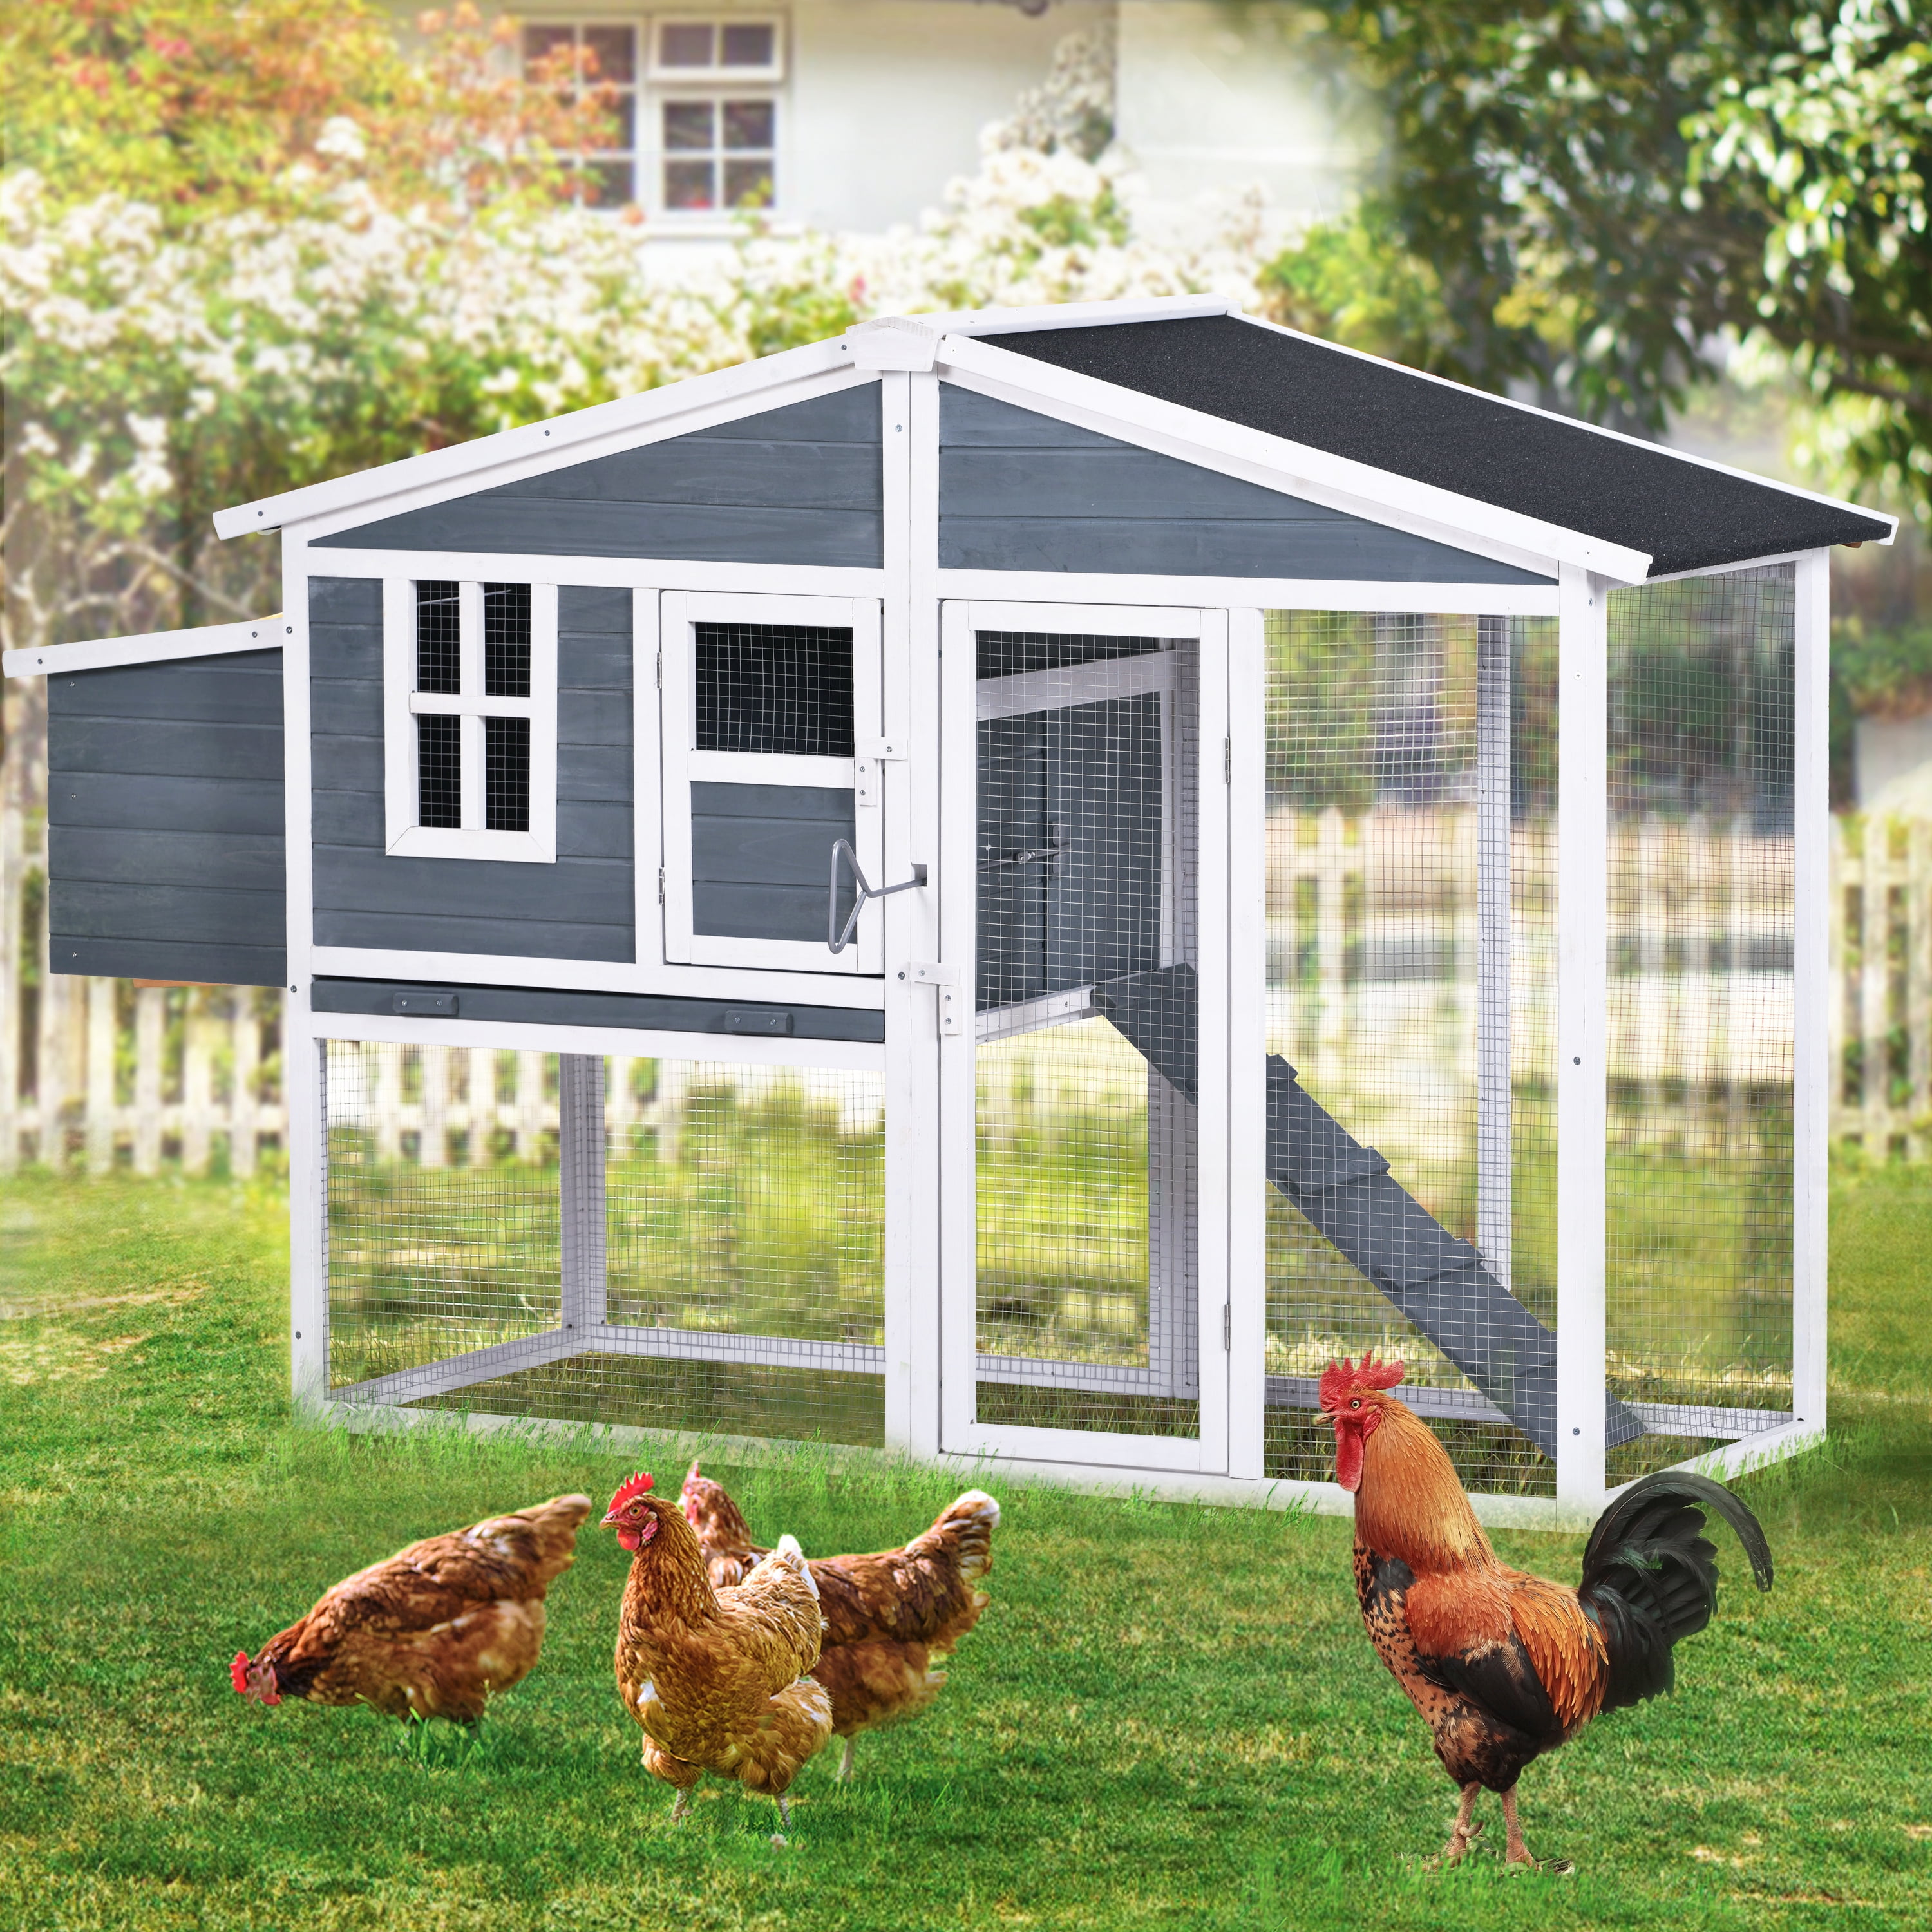 85" Large Wooden Chicken Coop Backyard Hen House 3-5 Chickens with nesting box 